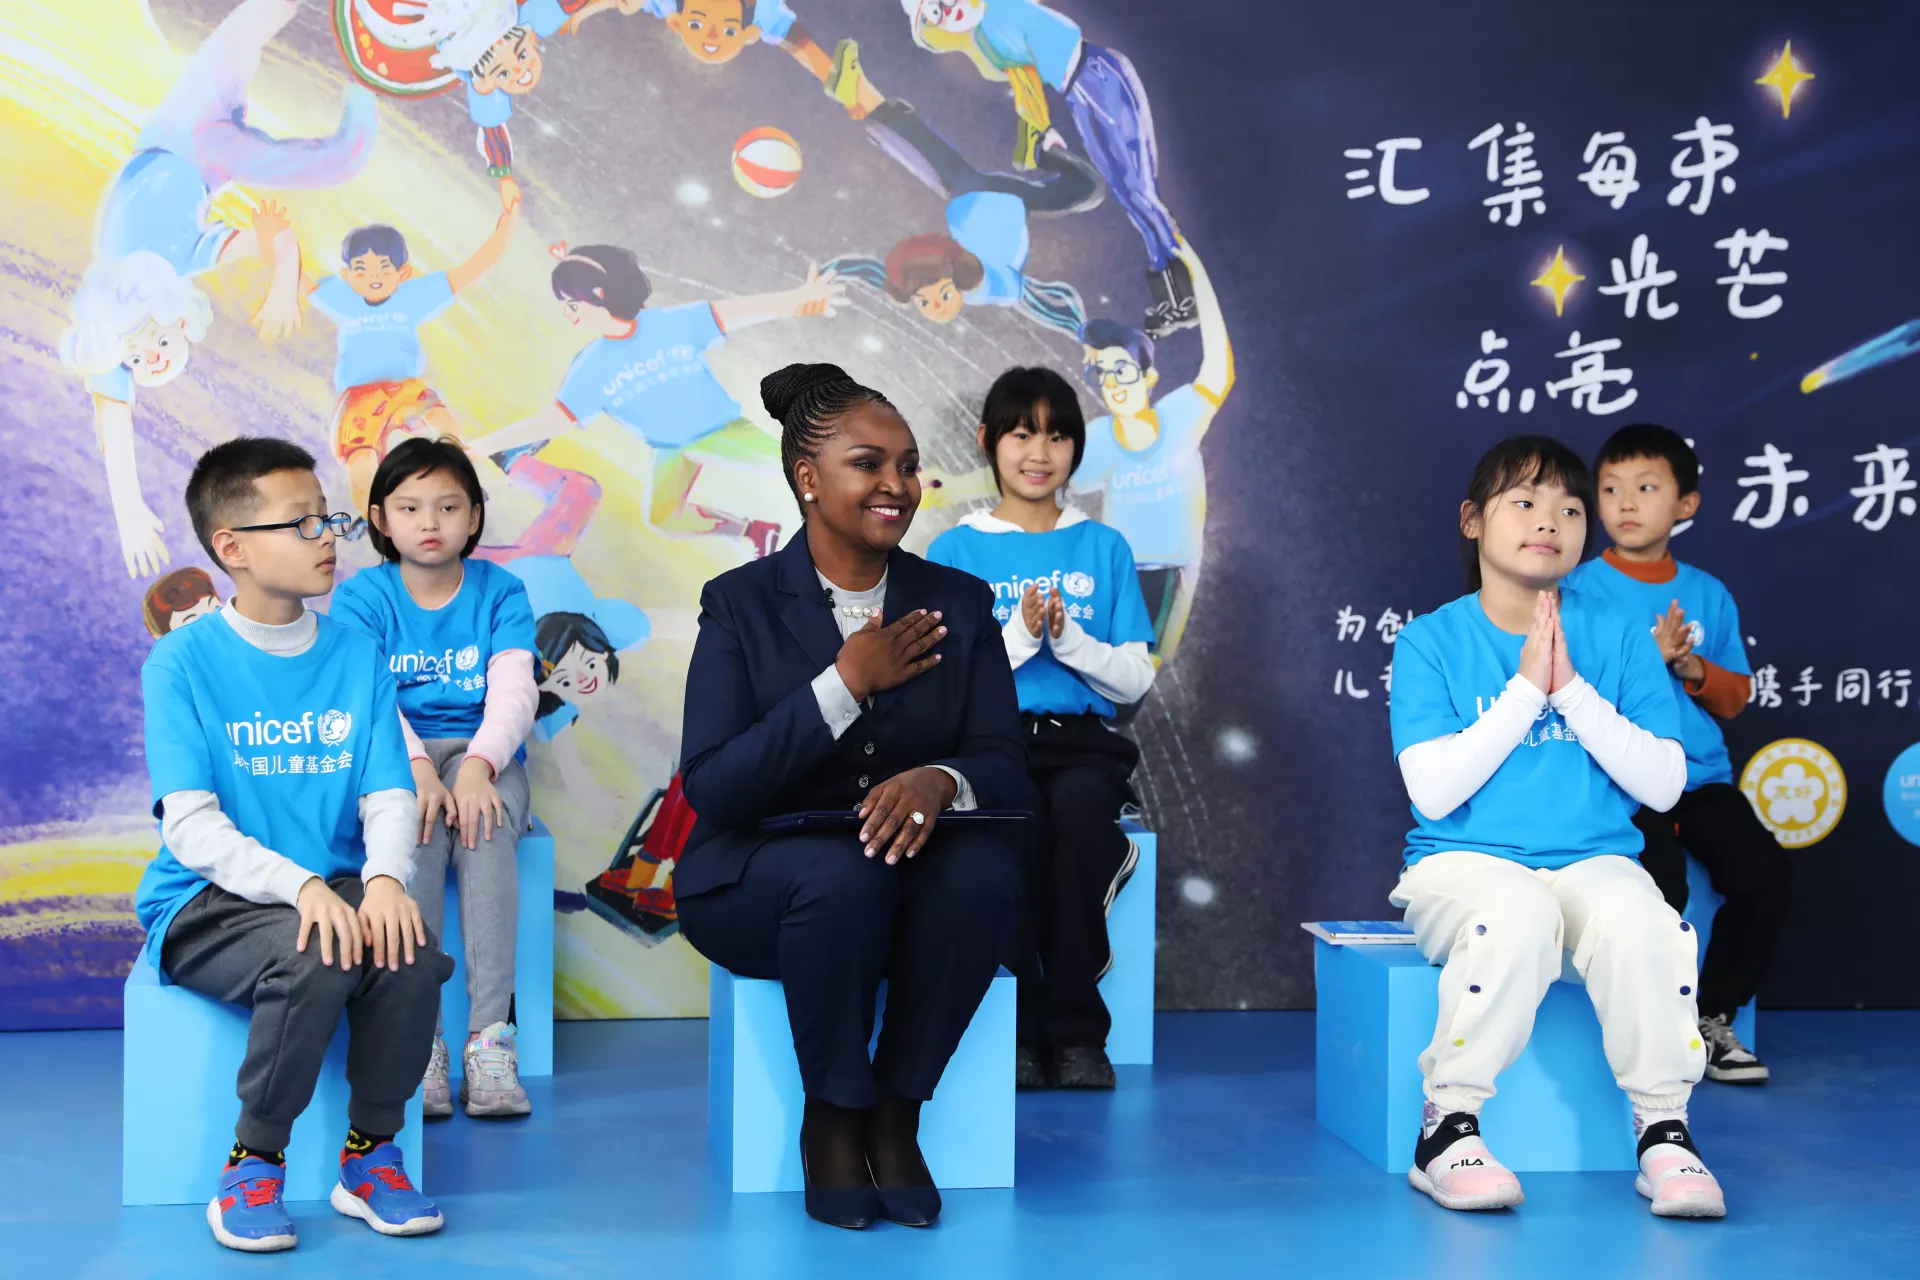 In a livestream from UNICEF China's office in Beijing, UNICEF Representative to China, Amakobe Sande, joins children in the celebration of World Children's Day on 20 November 2022.